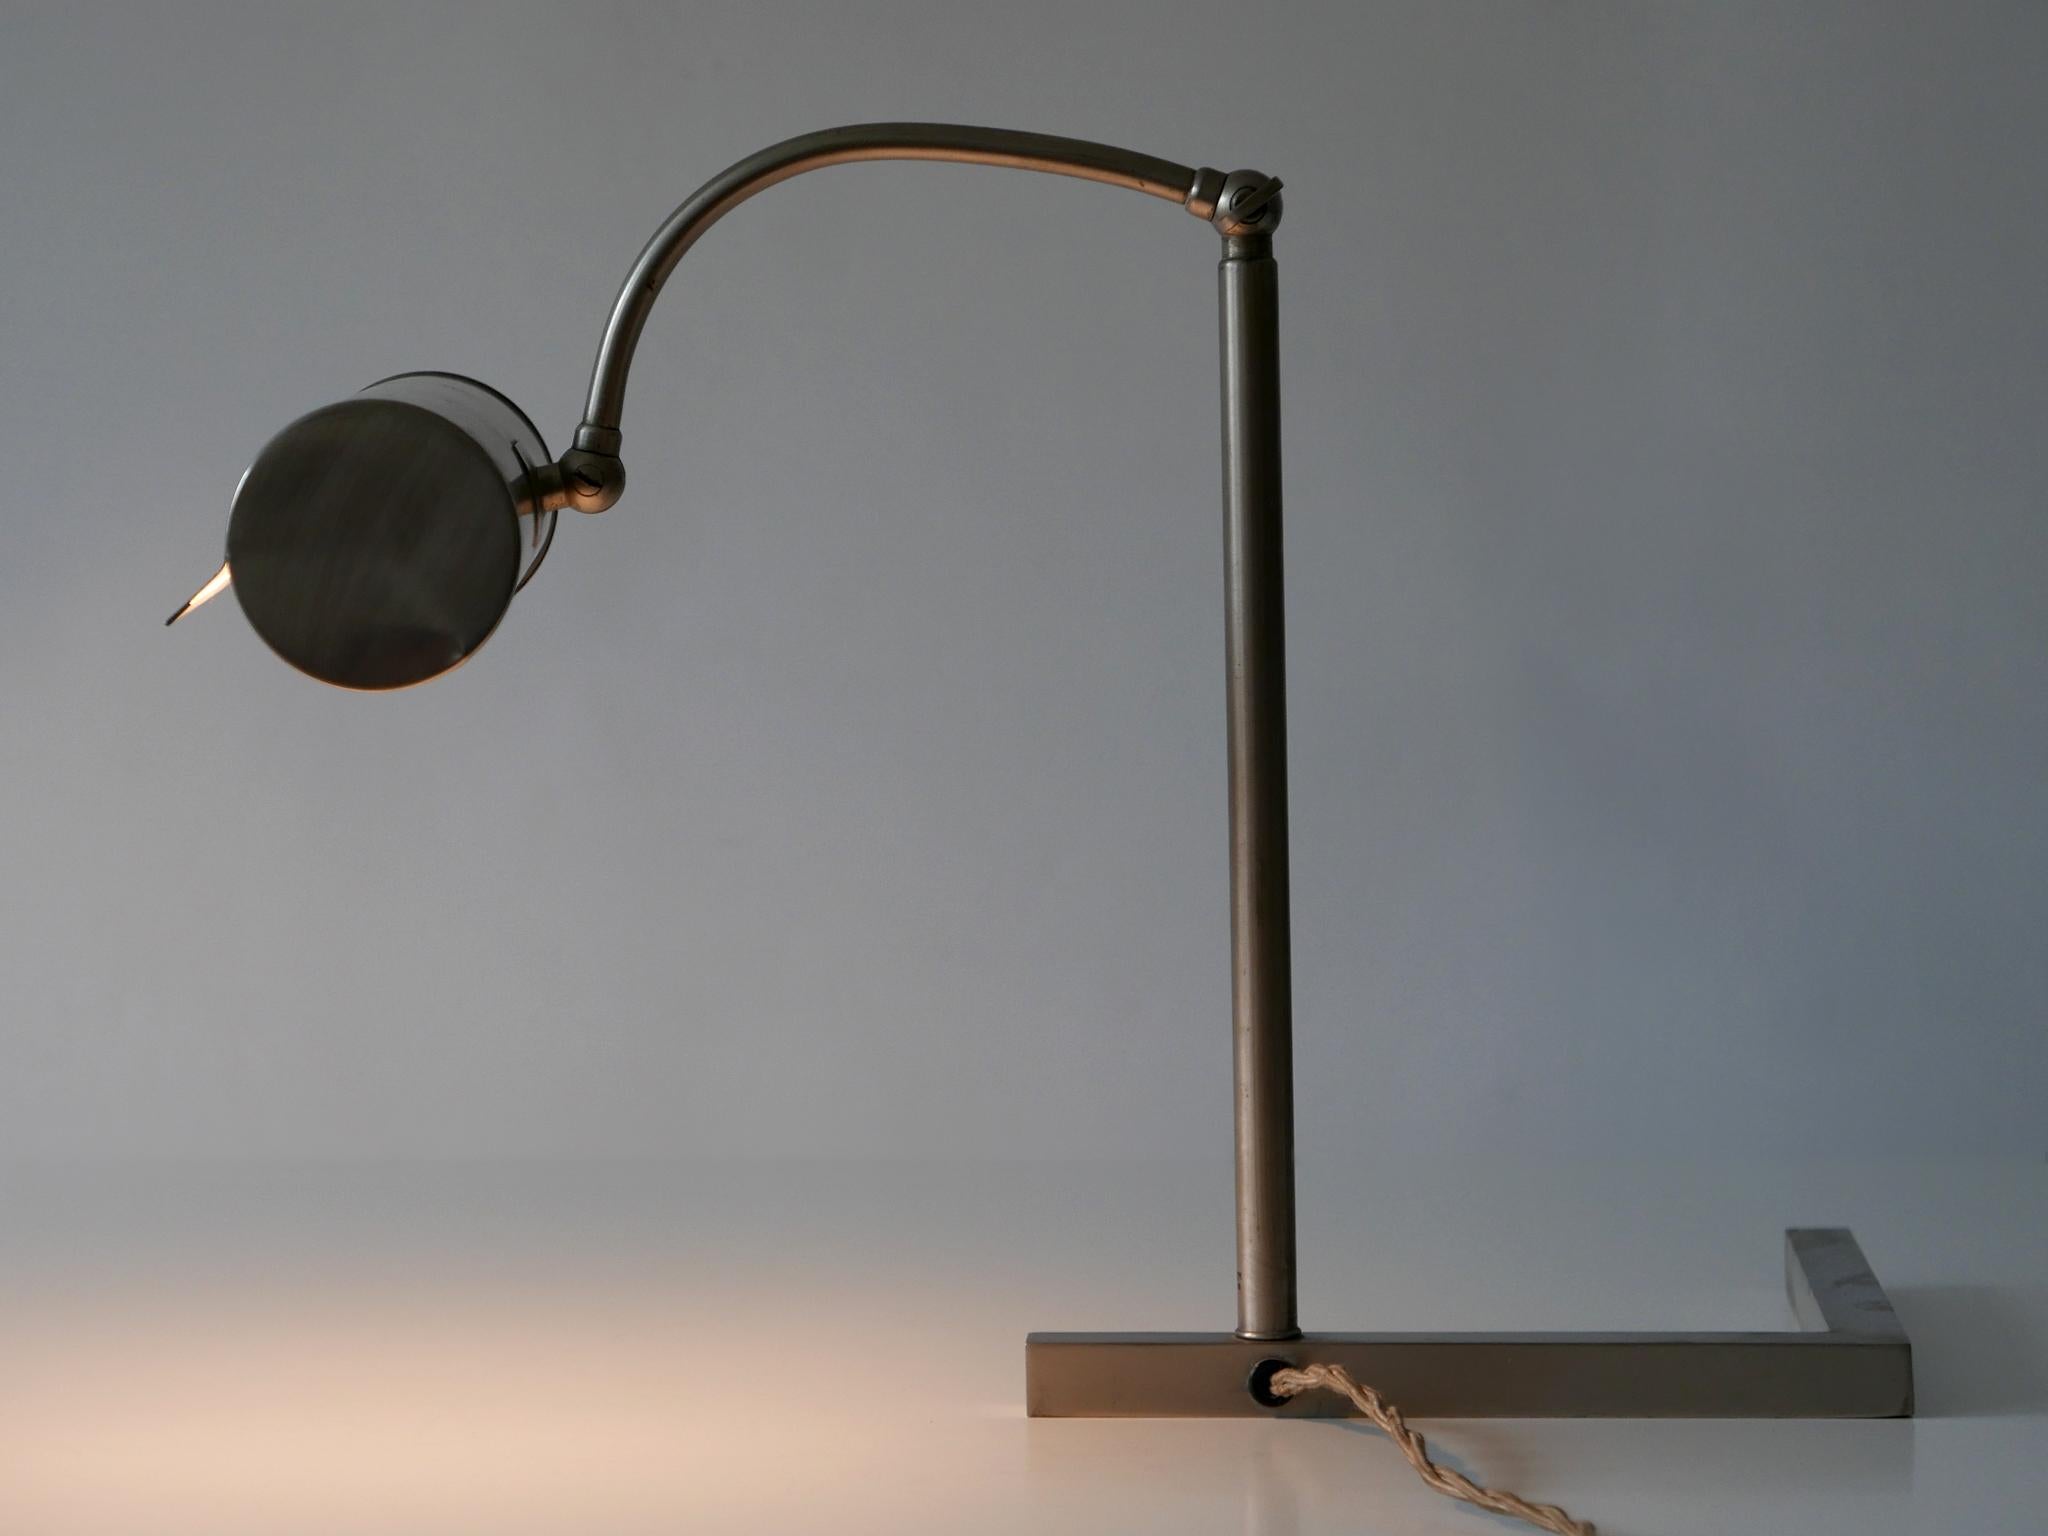 Plated Rare Bauhaus Table Lamp by Jacobus Johannes Pieter Oud for W. H. Gispen 1920s